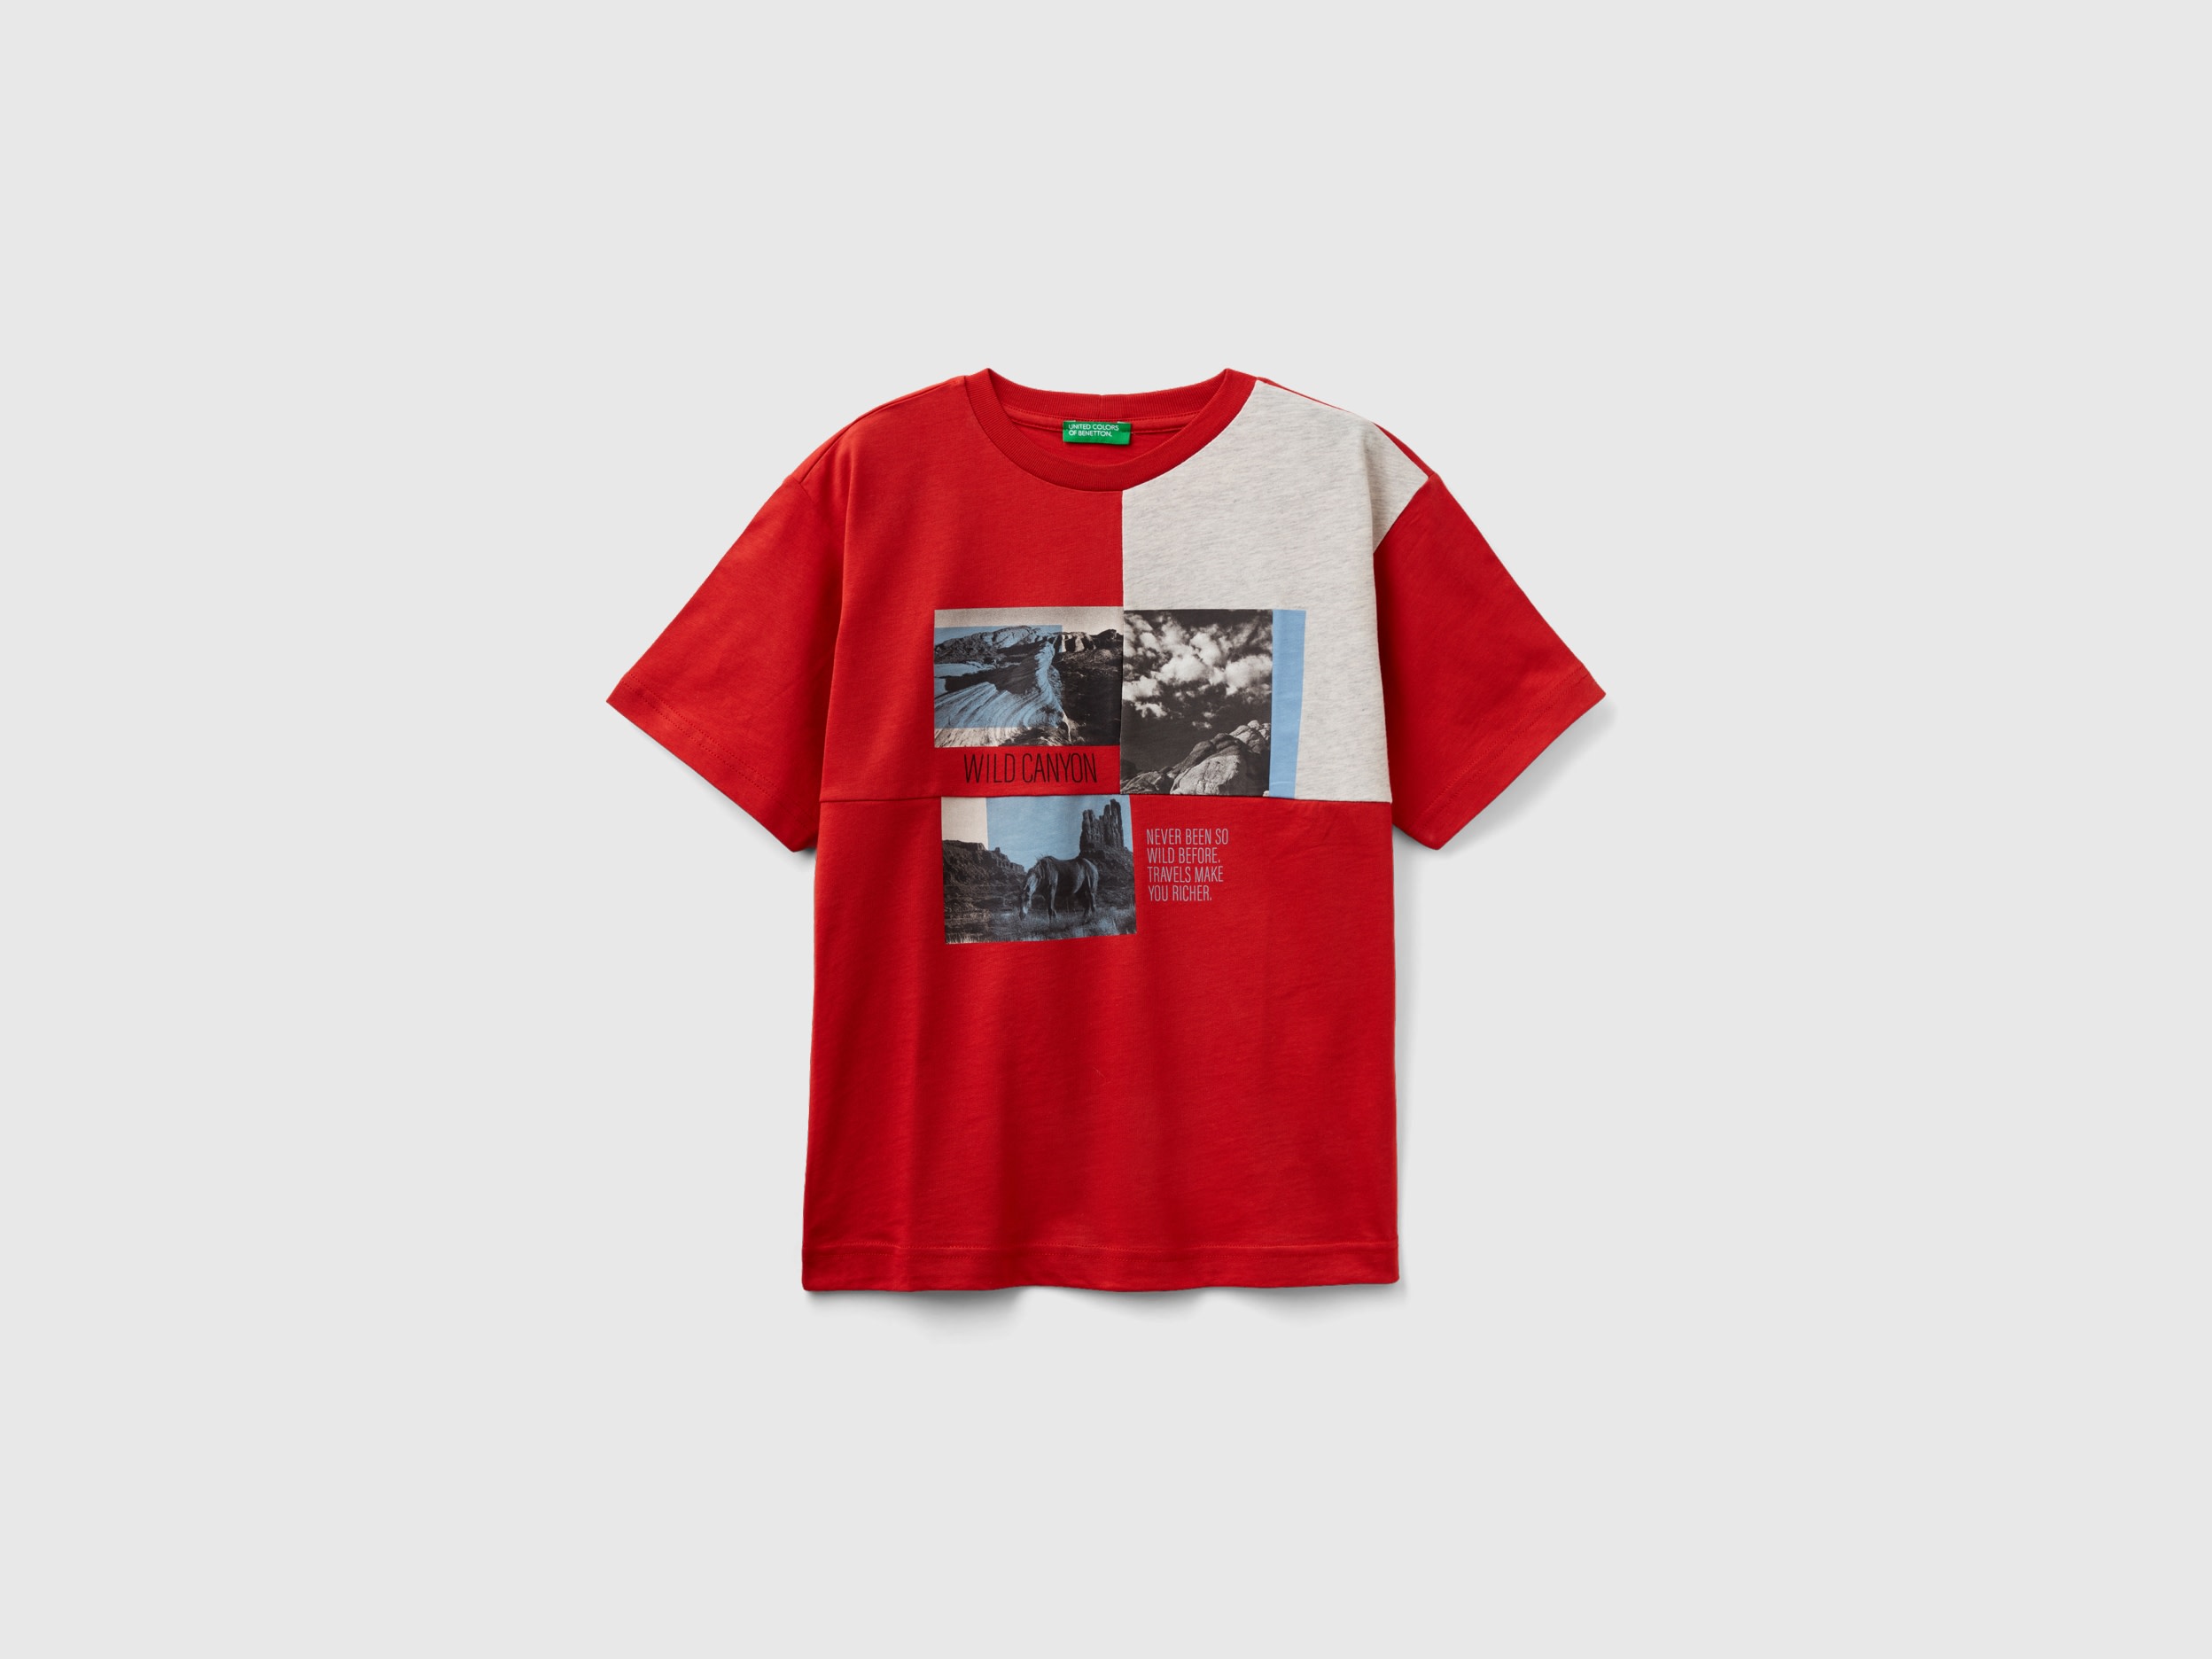 Benetton, T-shirt With Photo Print, size 2XL, Red, Kids